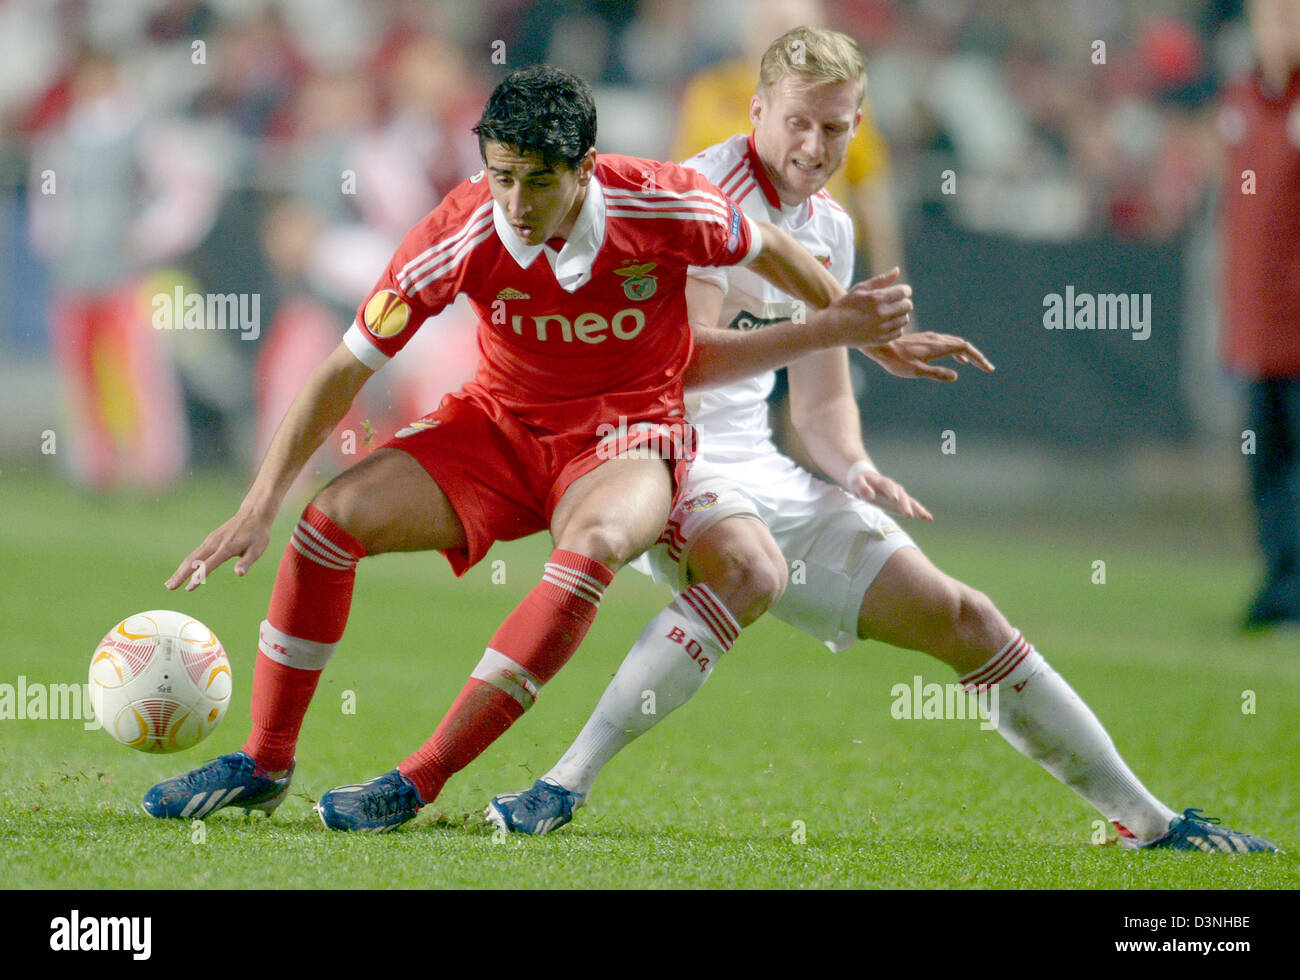 Benfica's Andre Almeida (L) and Andre Schuerrle of Leverkusen vie for the ball during the UEFA Europa League round of 32 second leg soccer match between Benfica Lisbon and Bayer Leverkusen at Estadio da Luz in Lisbon, Portugal, 21 February 2013. Photo: Federico Gambarini/dpa Stock Photo